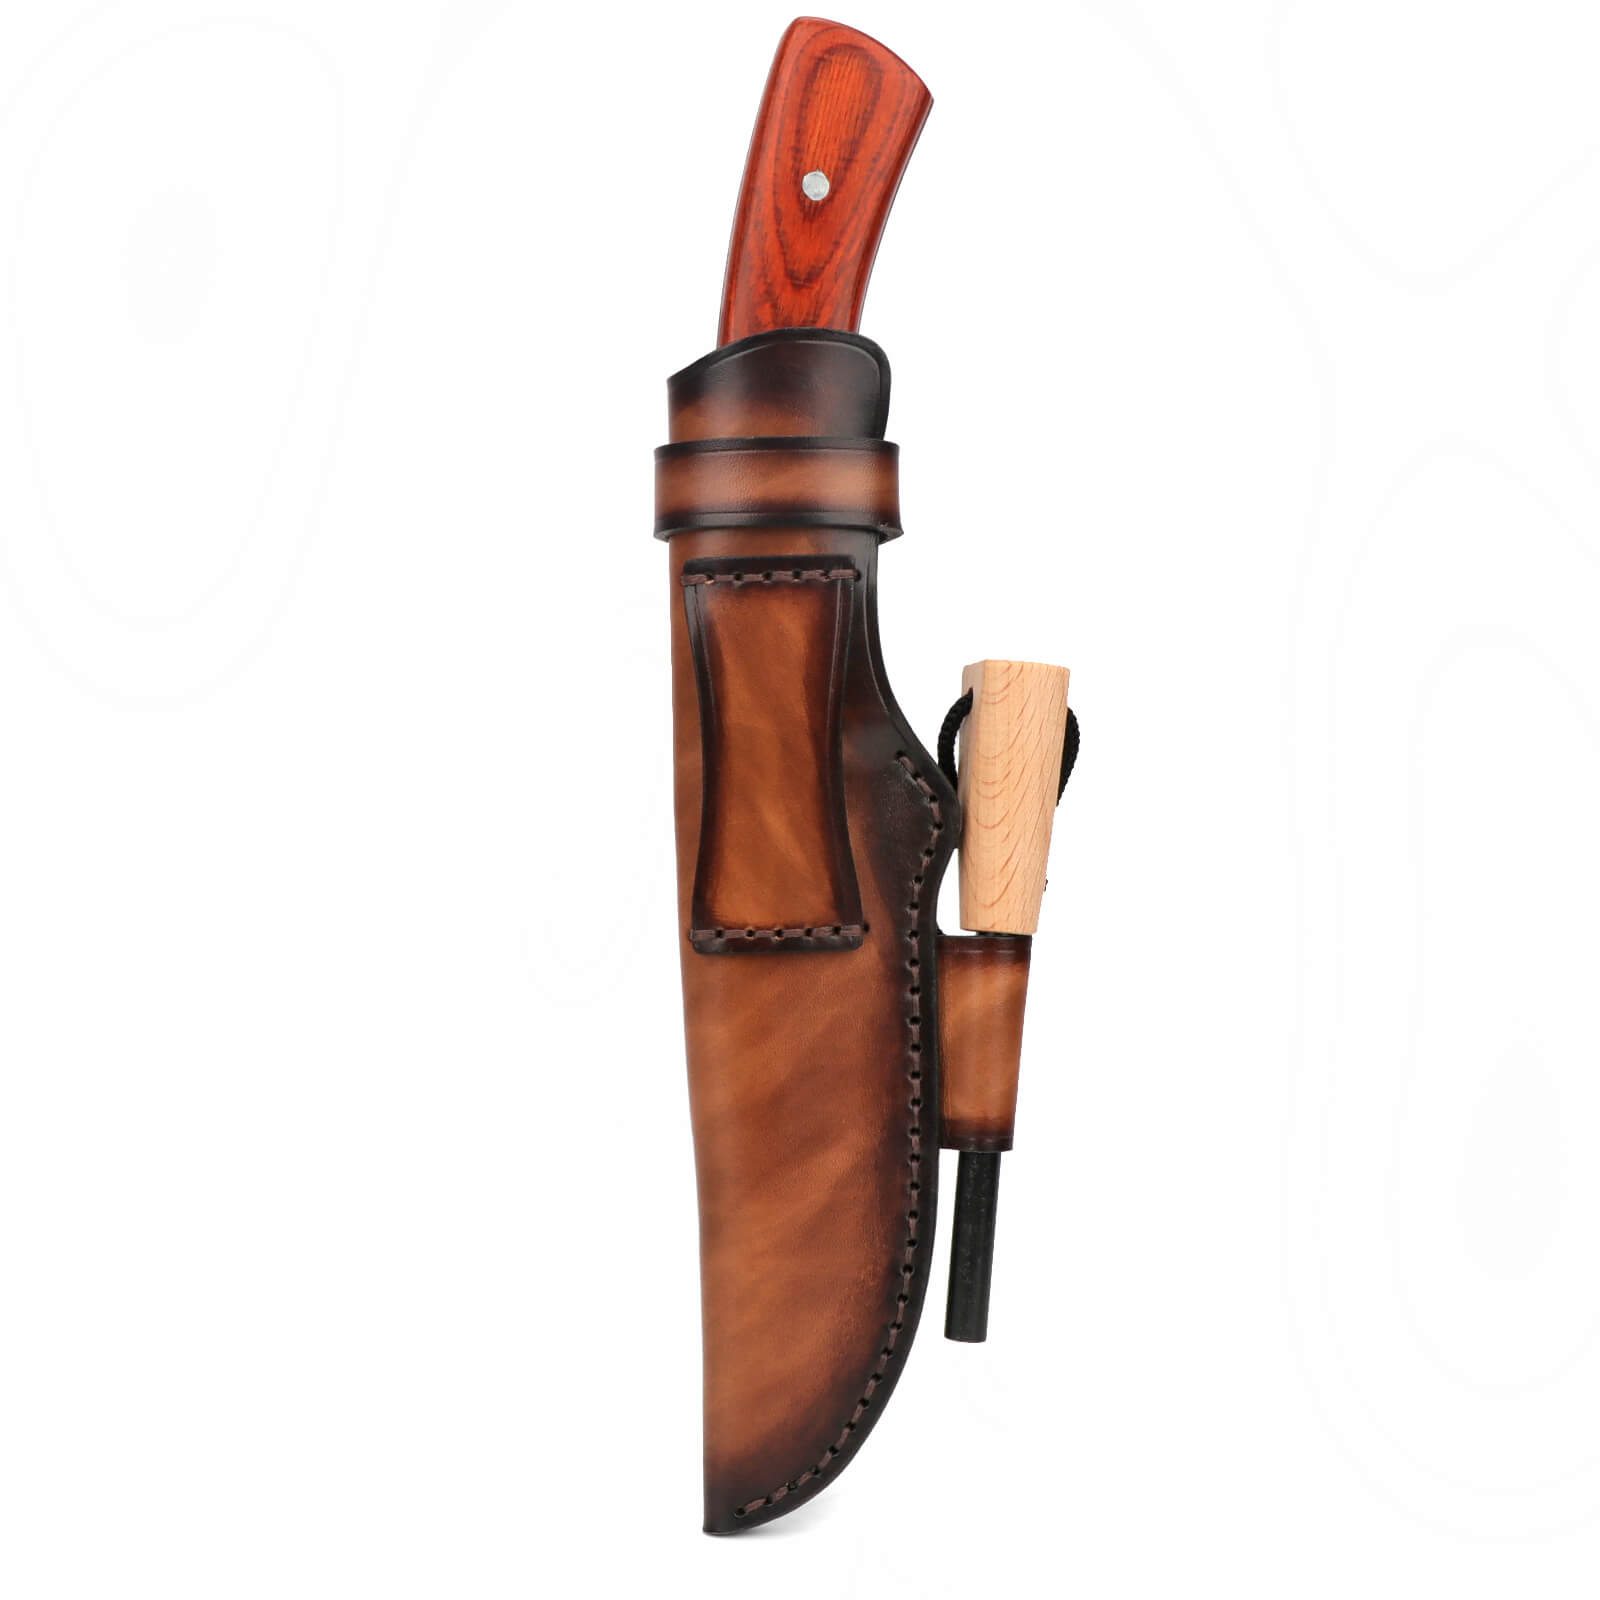 Tourbon Leather Fixed Blade Knife Sheath with Fire Starter Slot for Outdoor Hunting Bushcraft Camping